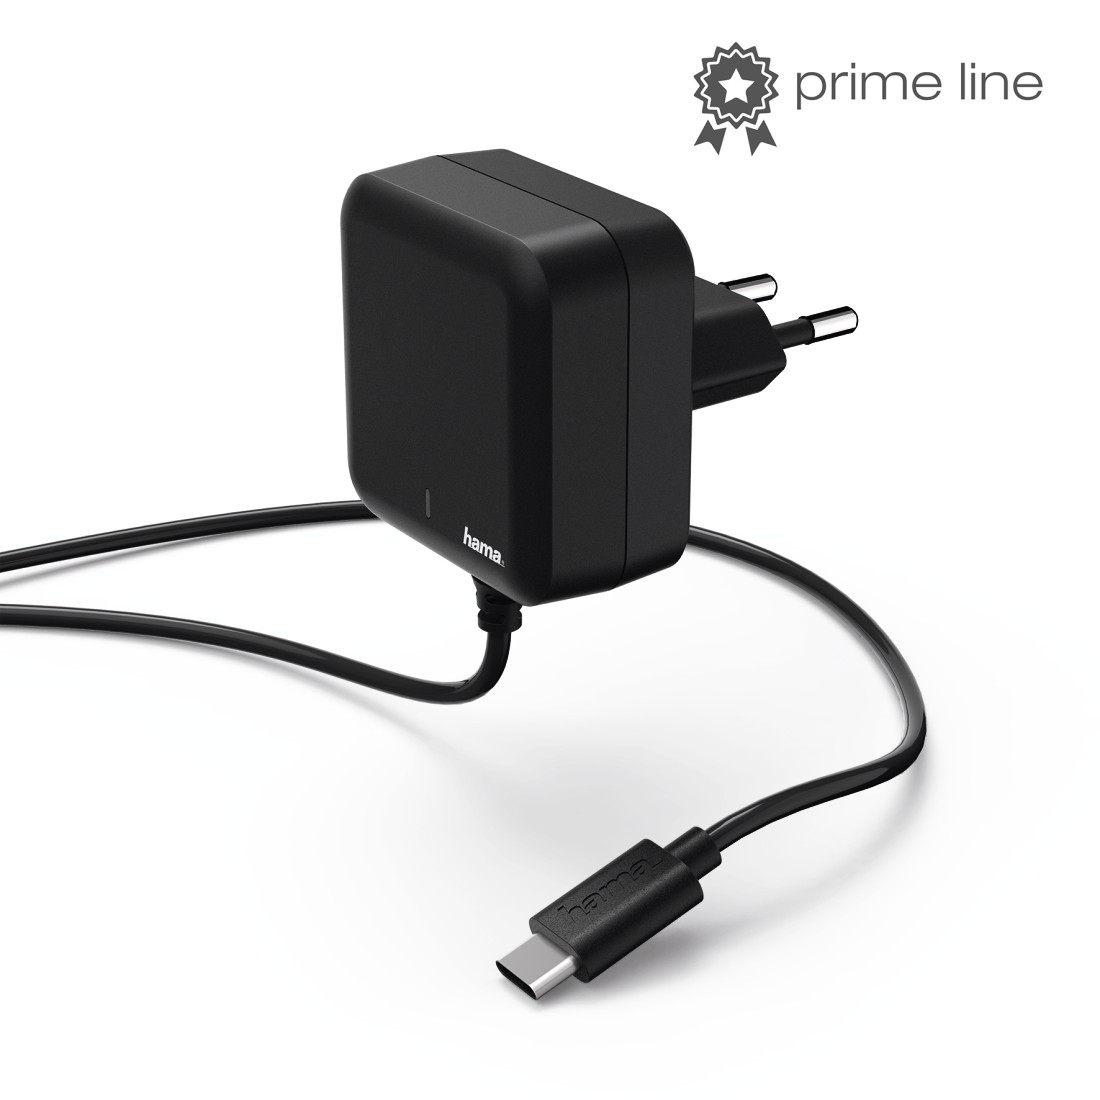 00178309 Hama Charger, USB Type-C, power delivery (PD), 3A, black | hama.com